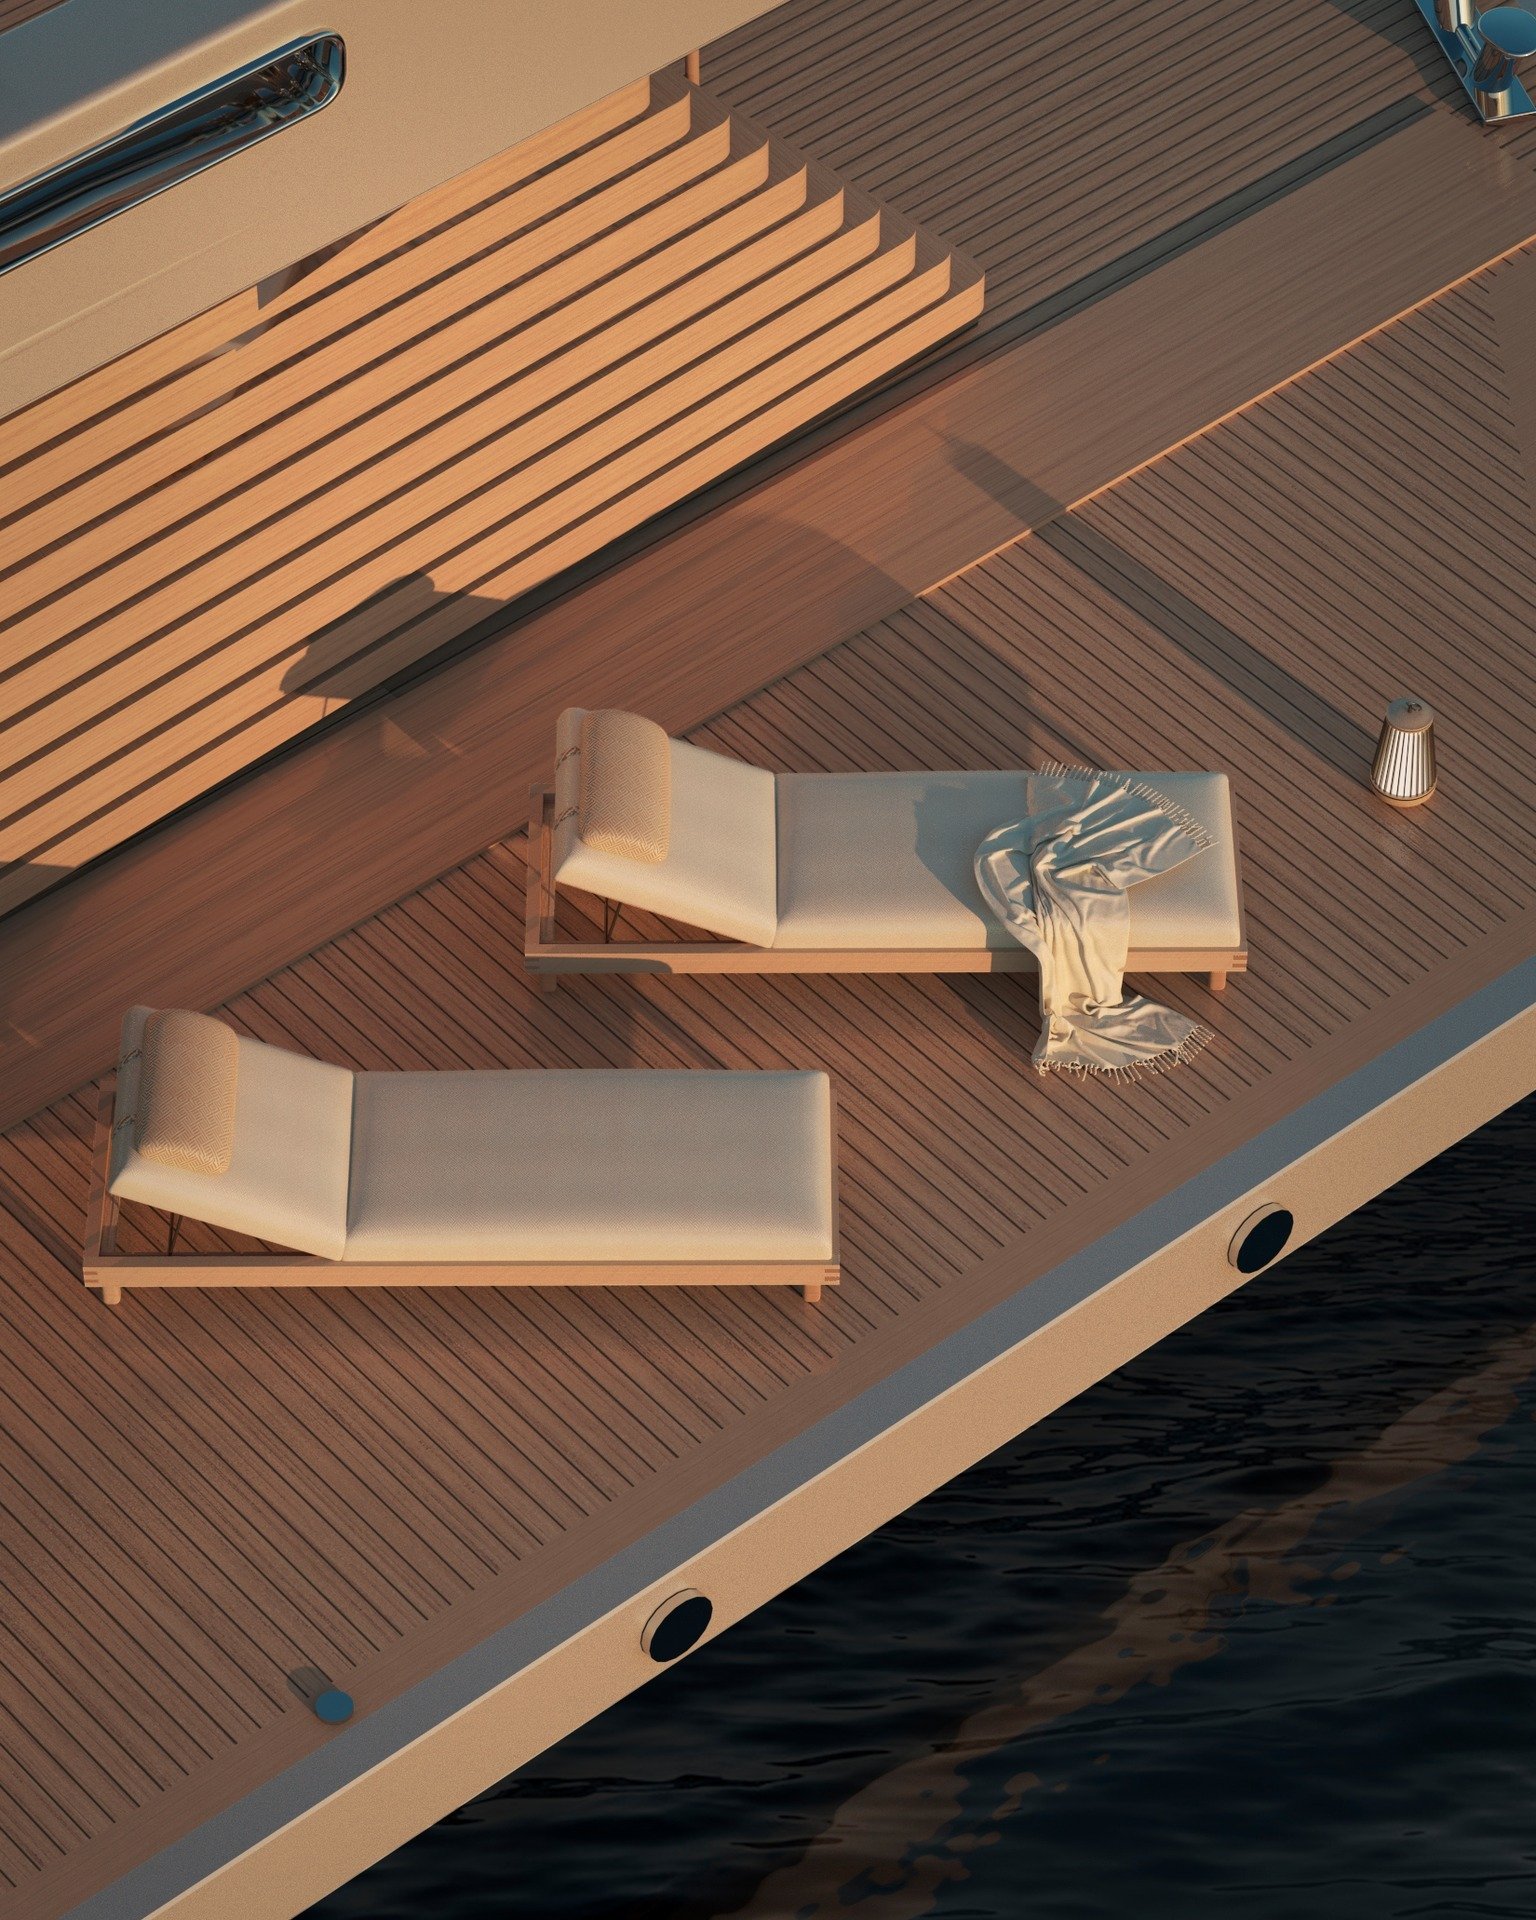 Details of Dunes Yacht

Project: Dunes Yacht, part of Simply Custom Collection @oceancoyacht 

#thetouchyachting